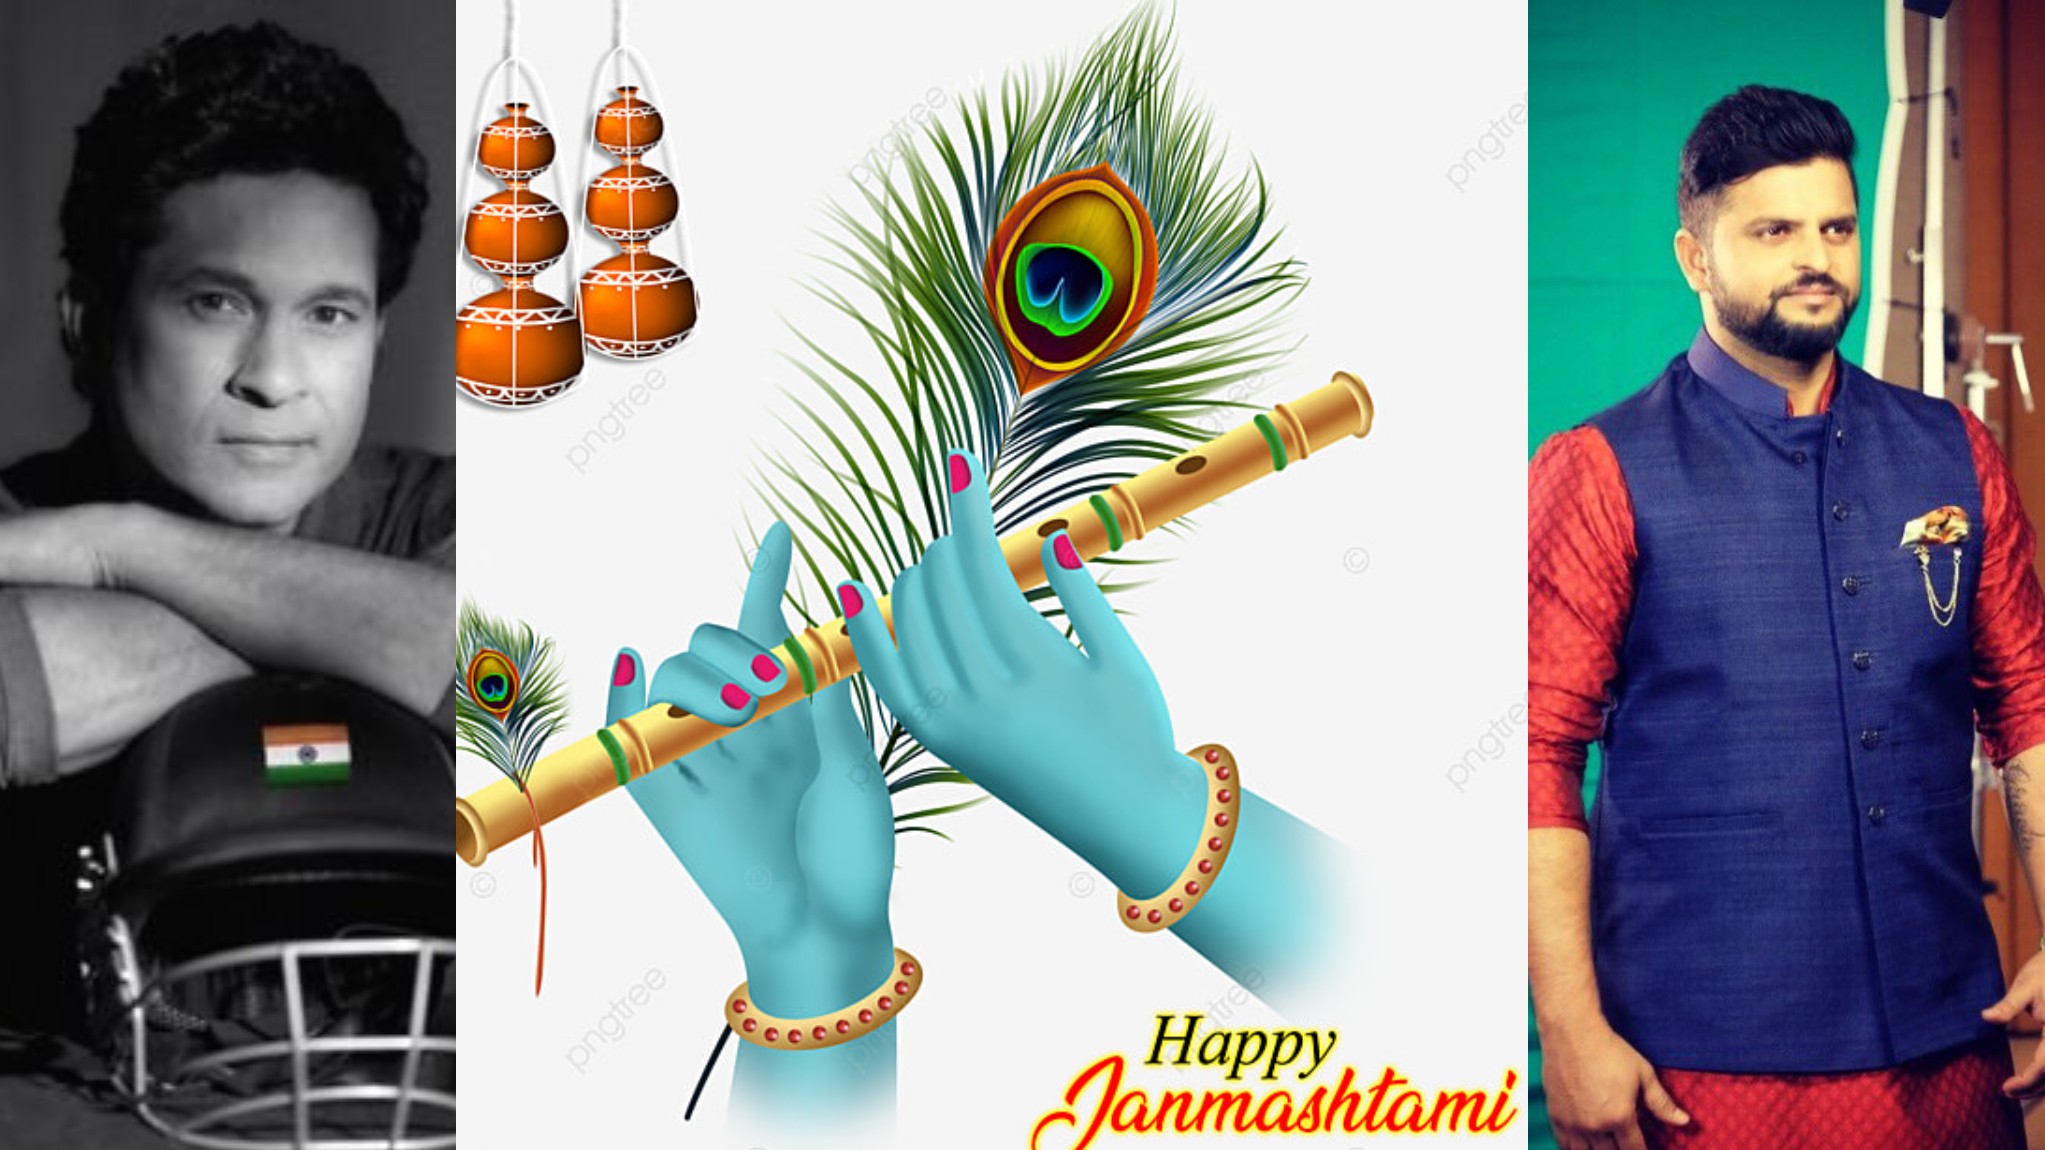 Indian Cricketers wish everyone on occasion of Janmashtami